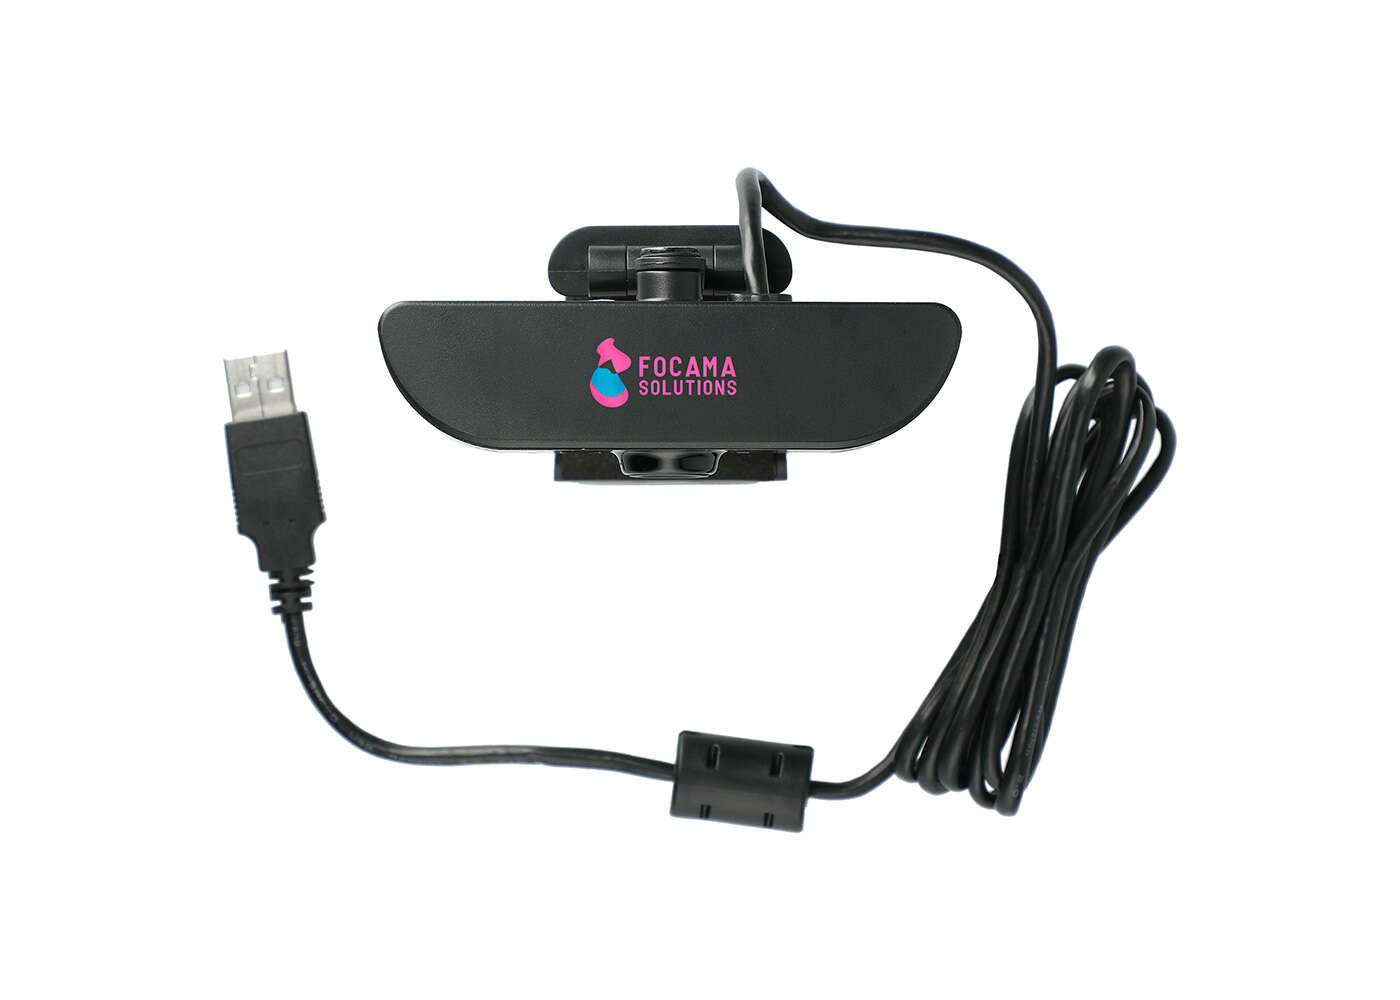 1080P HD Webcam with Microphone - Black